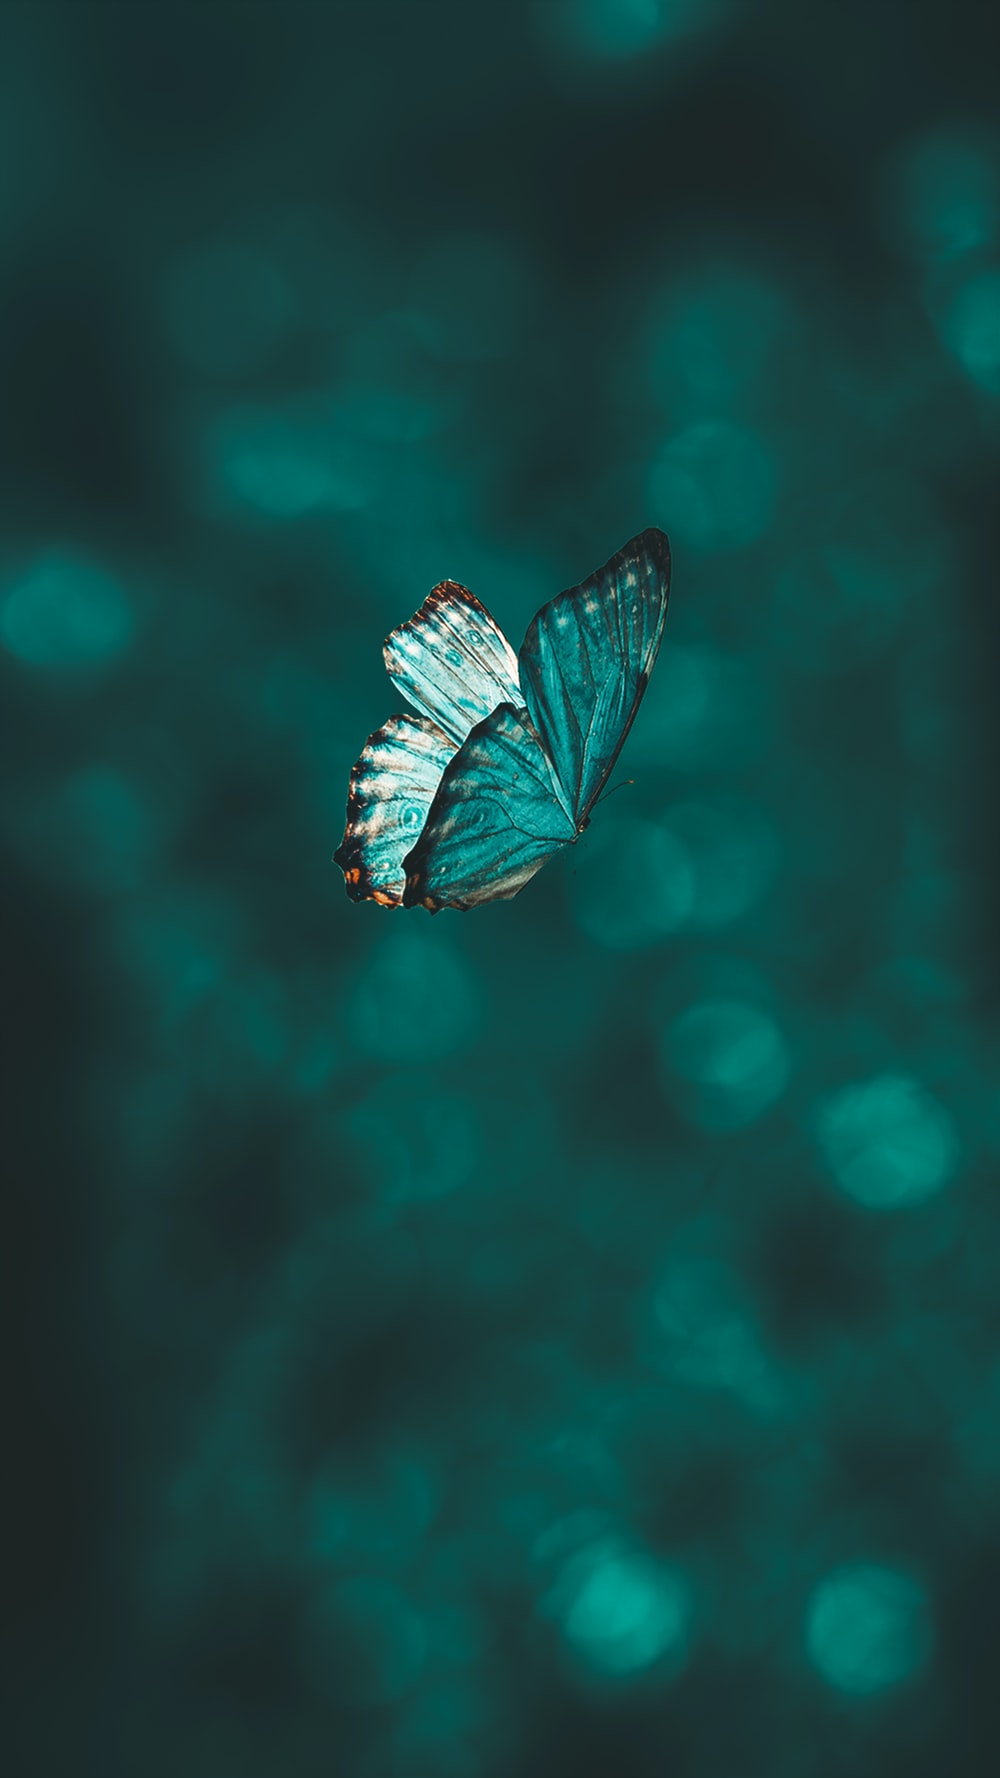 Butterfly Ipad Wallpapers